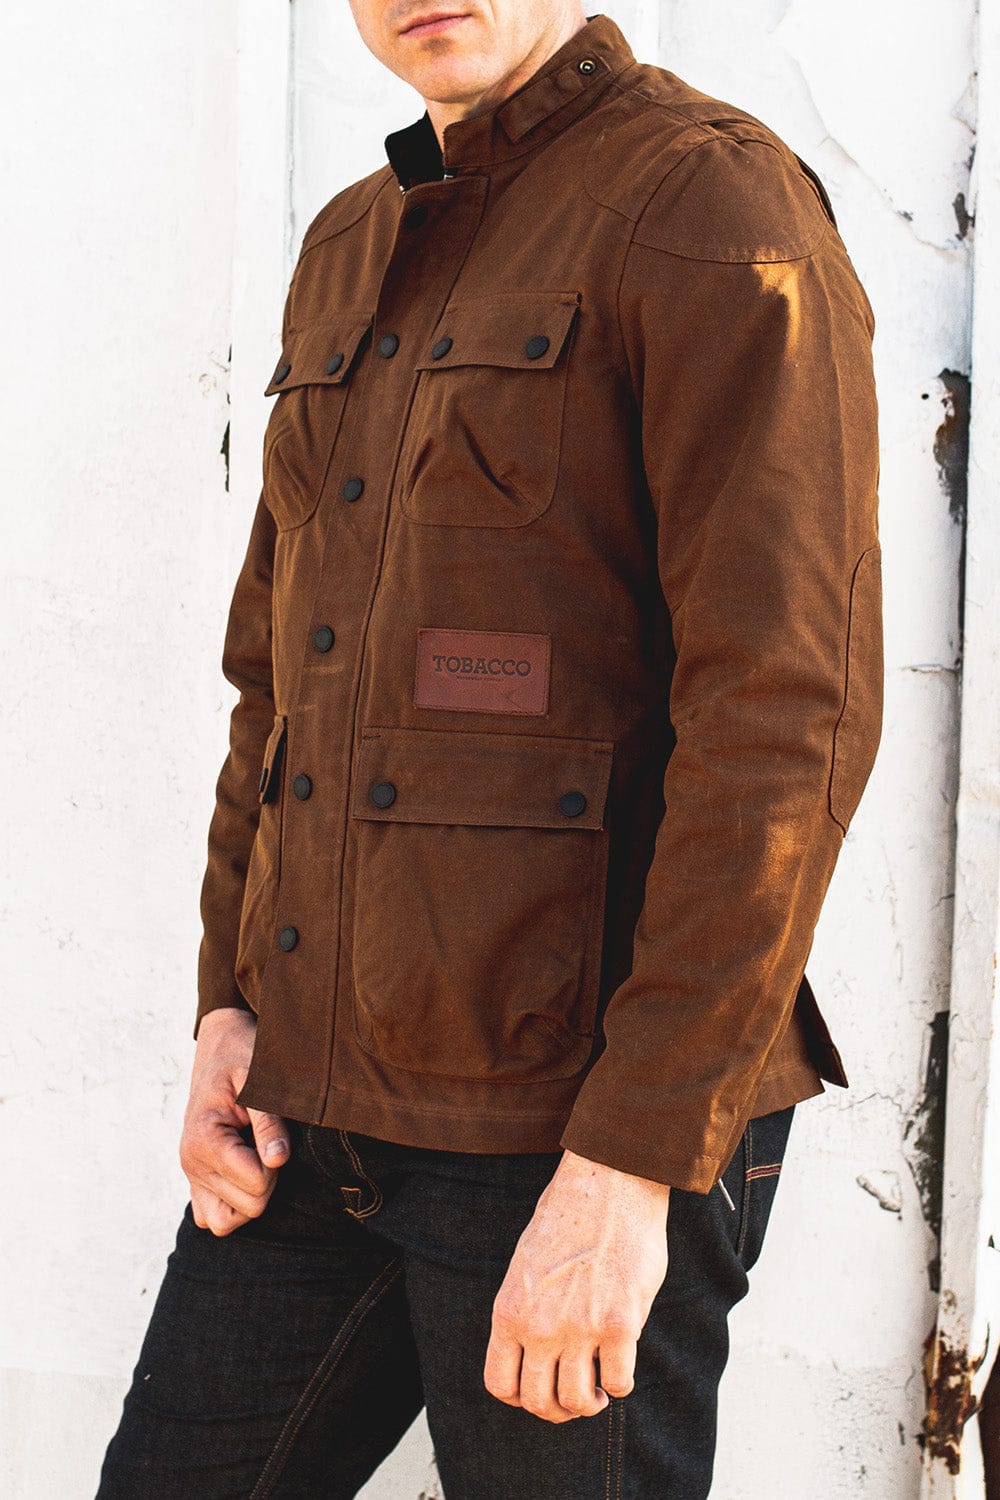 Jacket Back, - The Canvas Protective Elbow for McCoy Brown. and Shoulder Pockets D3O® Armor - Waxed Tobacco Motorwear